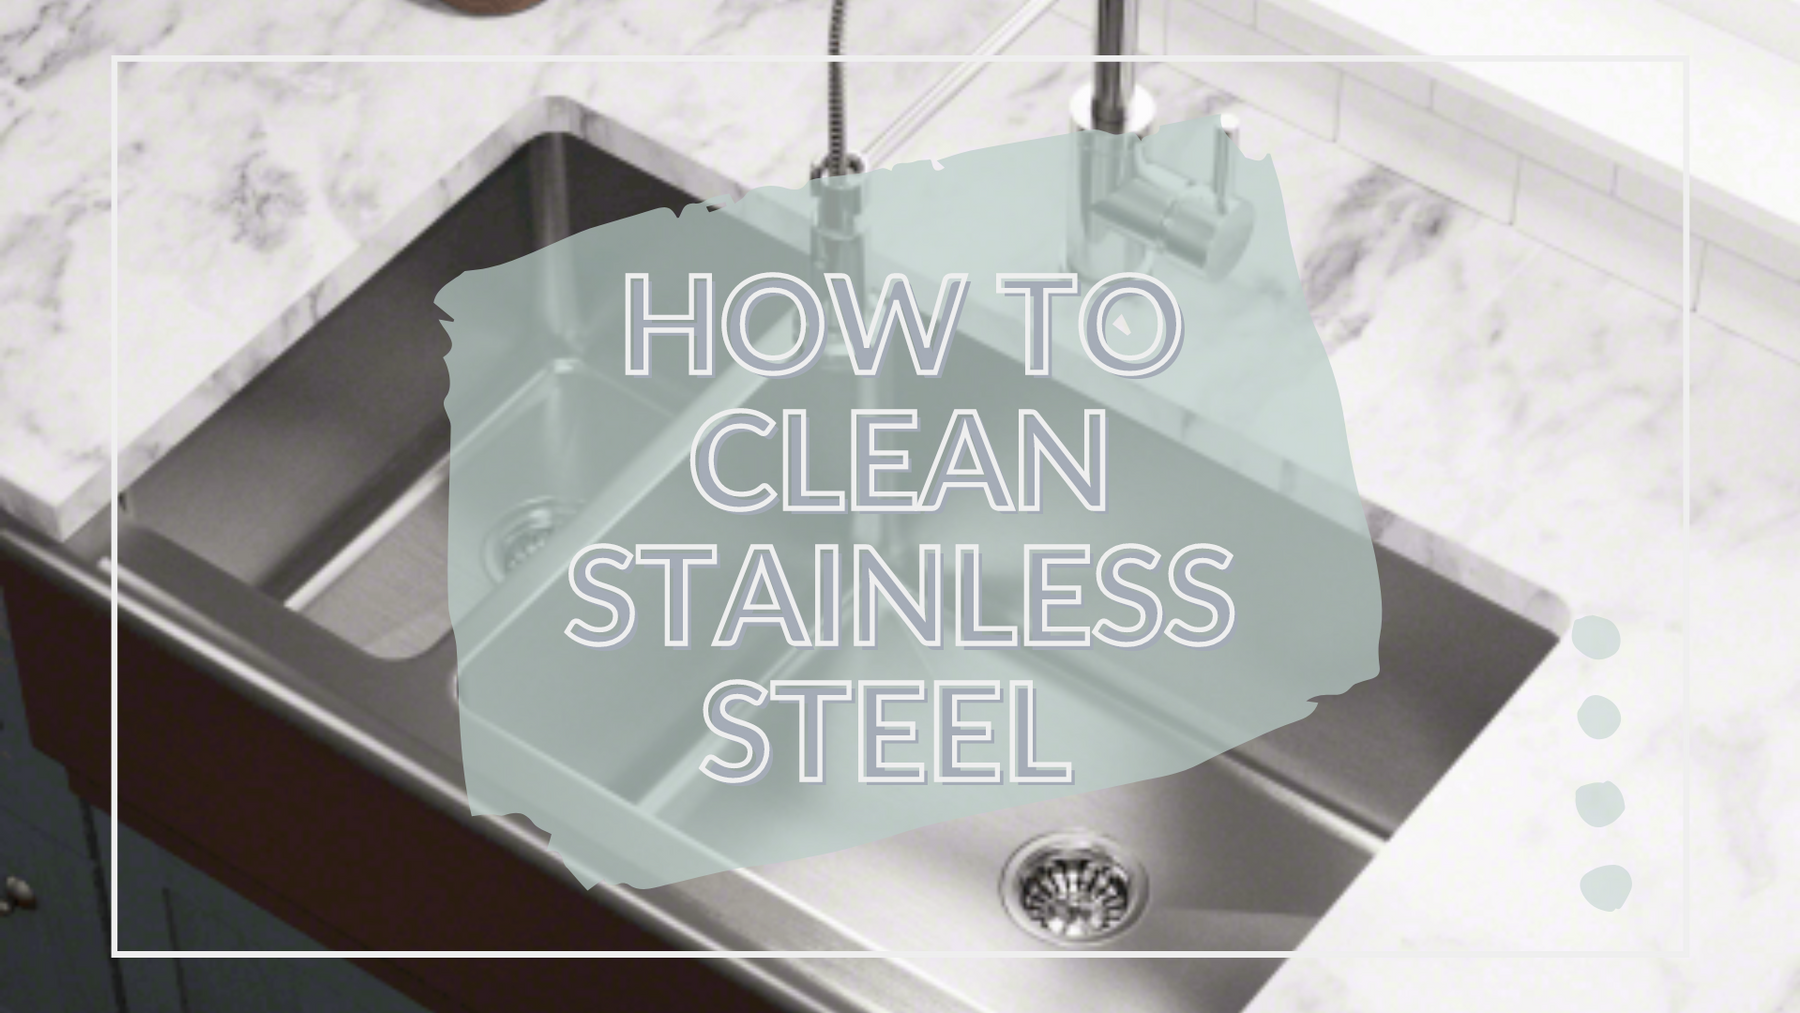 how to clean stainless steel materials